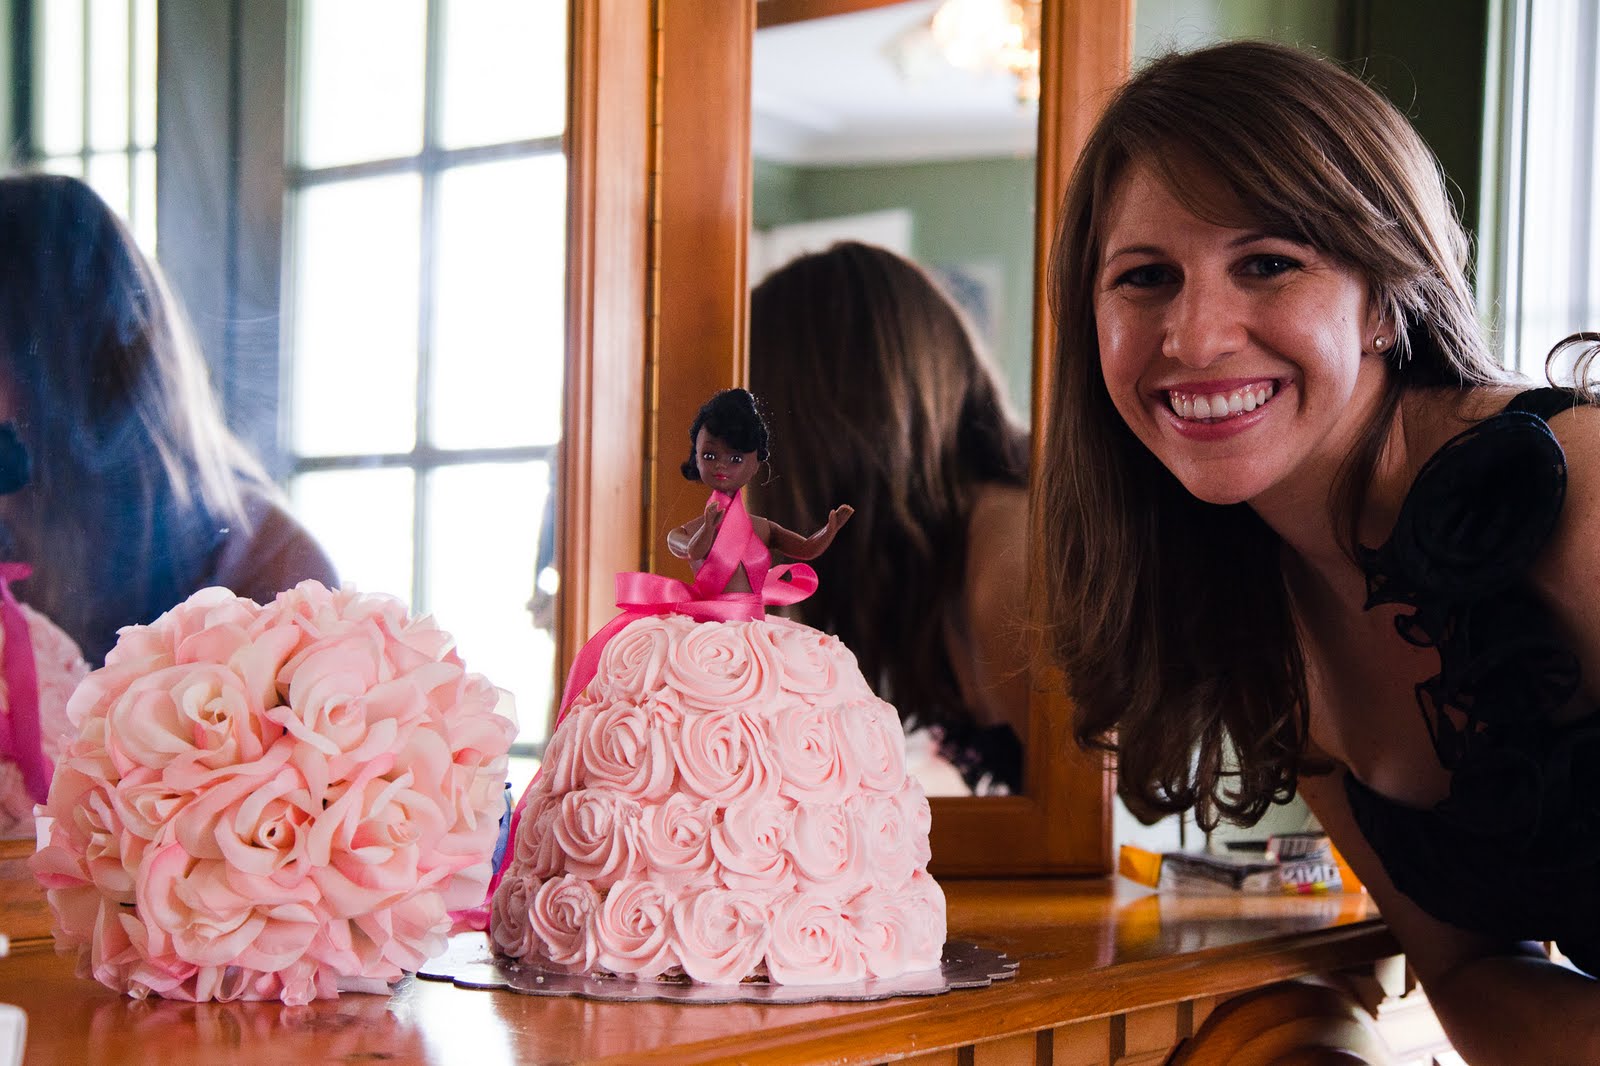 A Barbie Cake fit for a Bride